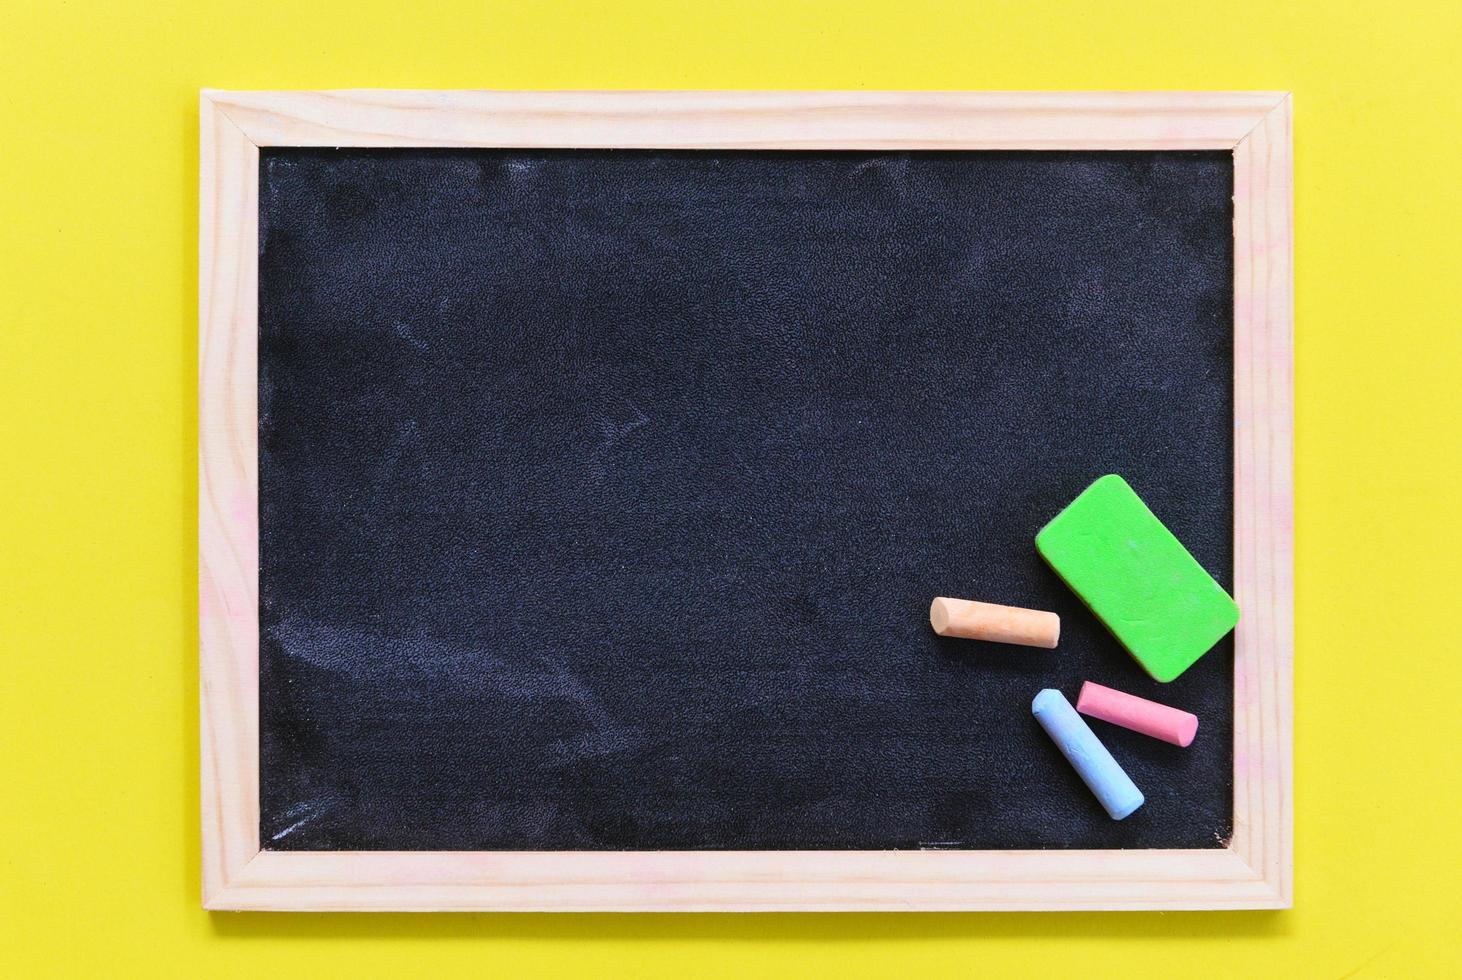 Blackboard dark or chalkboard with horizontal and banner - blackboard texture chalk and eraser writing and drawing for education in school chalkboard background , selective focus photo